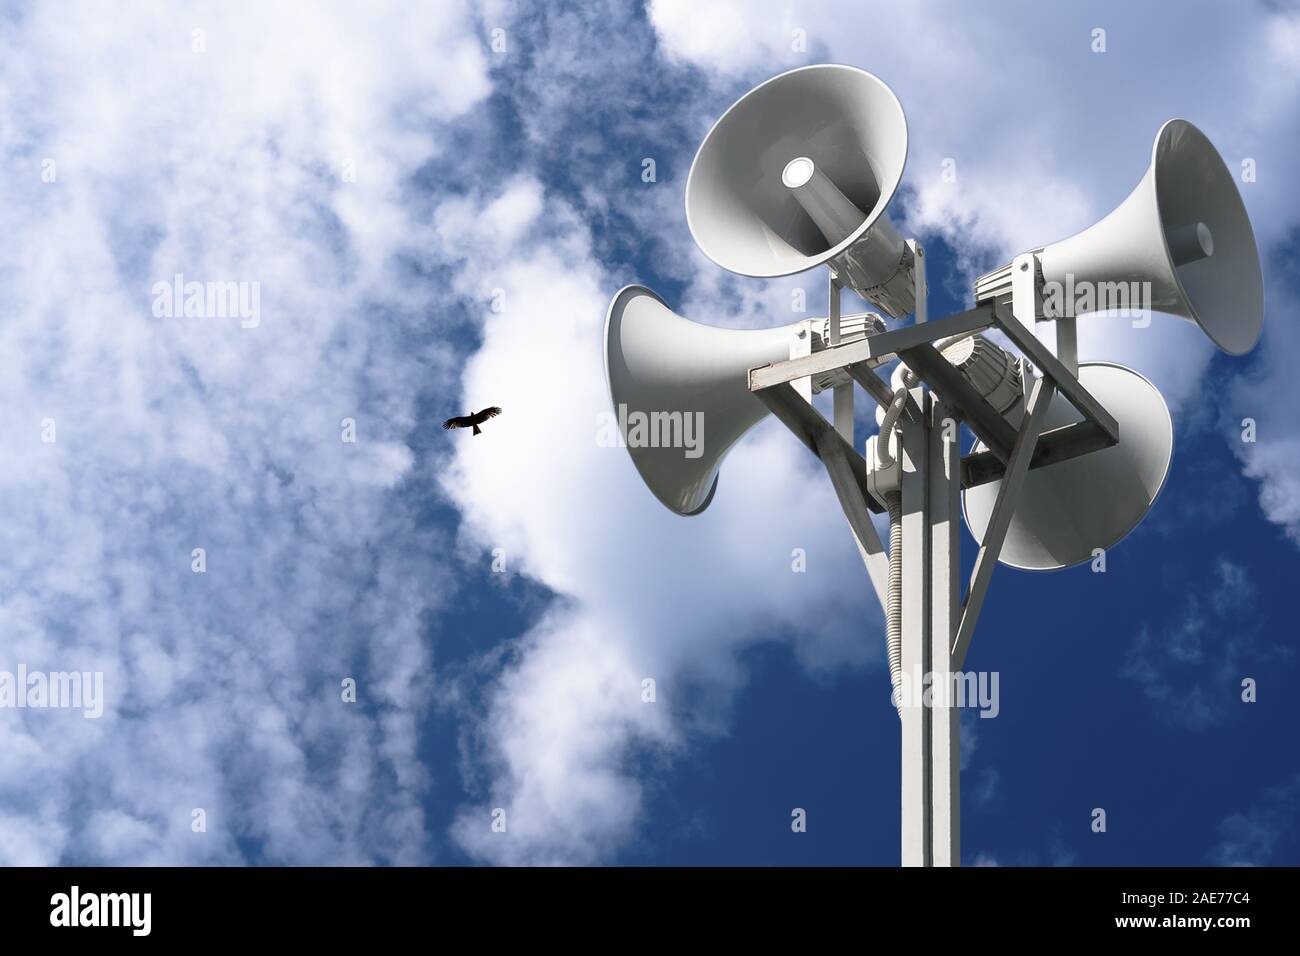 A column with four gray loudspeakers in a circle against a background of clouds and a flying bird. Hazard warning system. Ability to post your test or Stock Photo